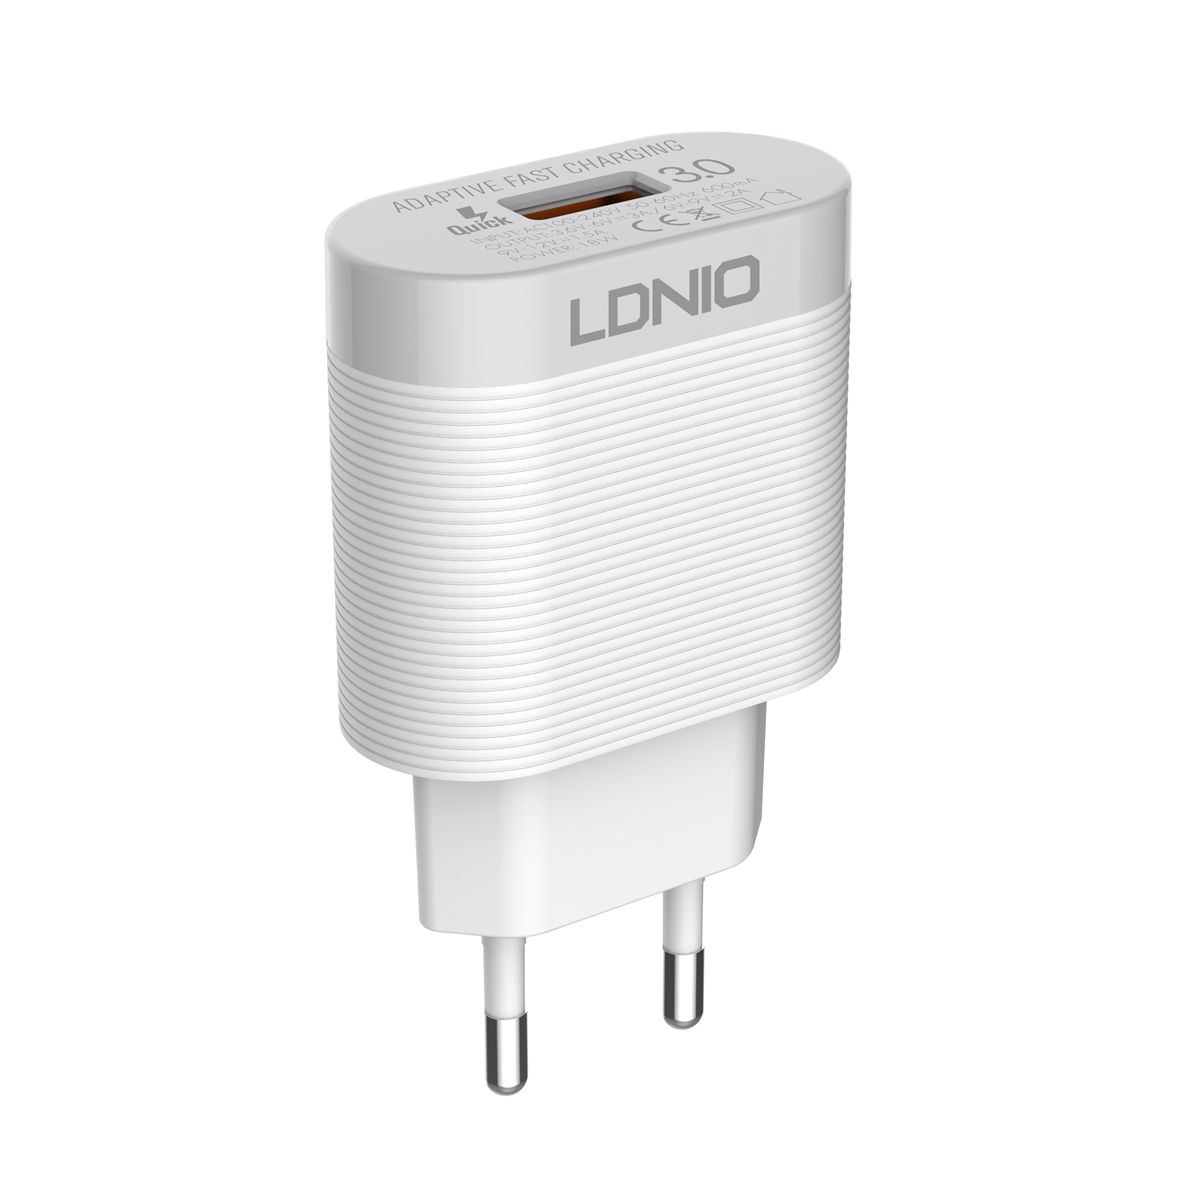 LDNIO-18W-QC30-USB-Charger-Travel-Wall-Charger-Adapter-With-USB-Type-C-Cable-Fast-Charging-For-iPhon-1737326